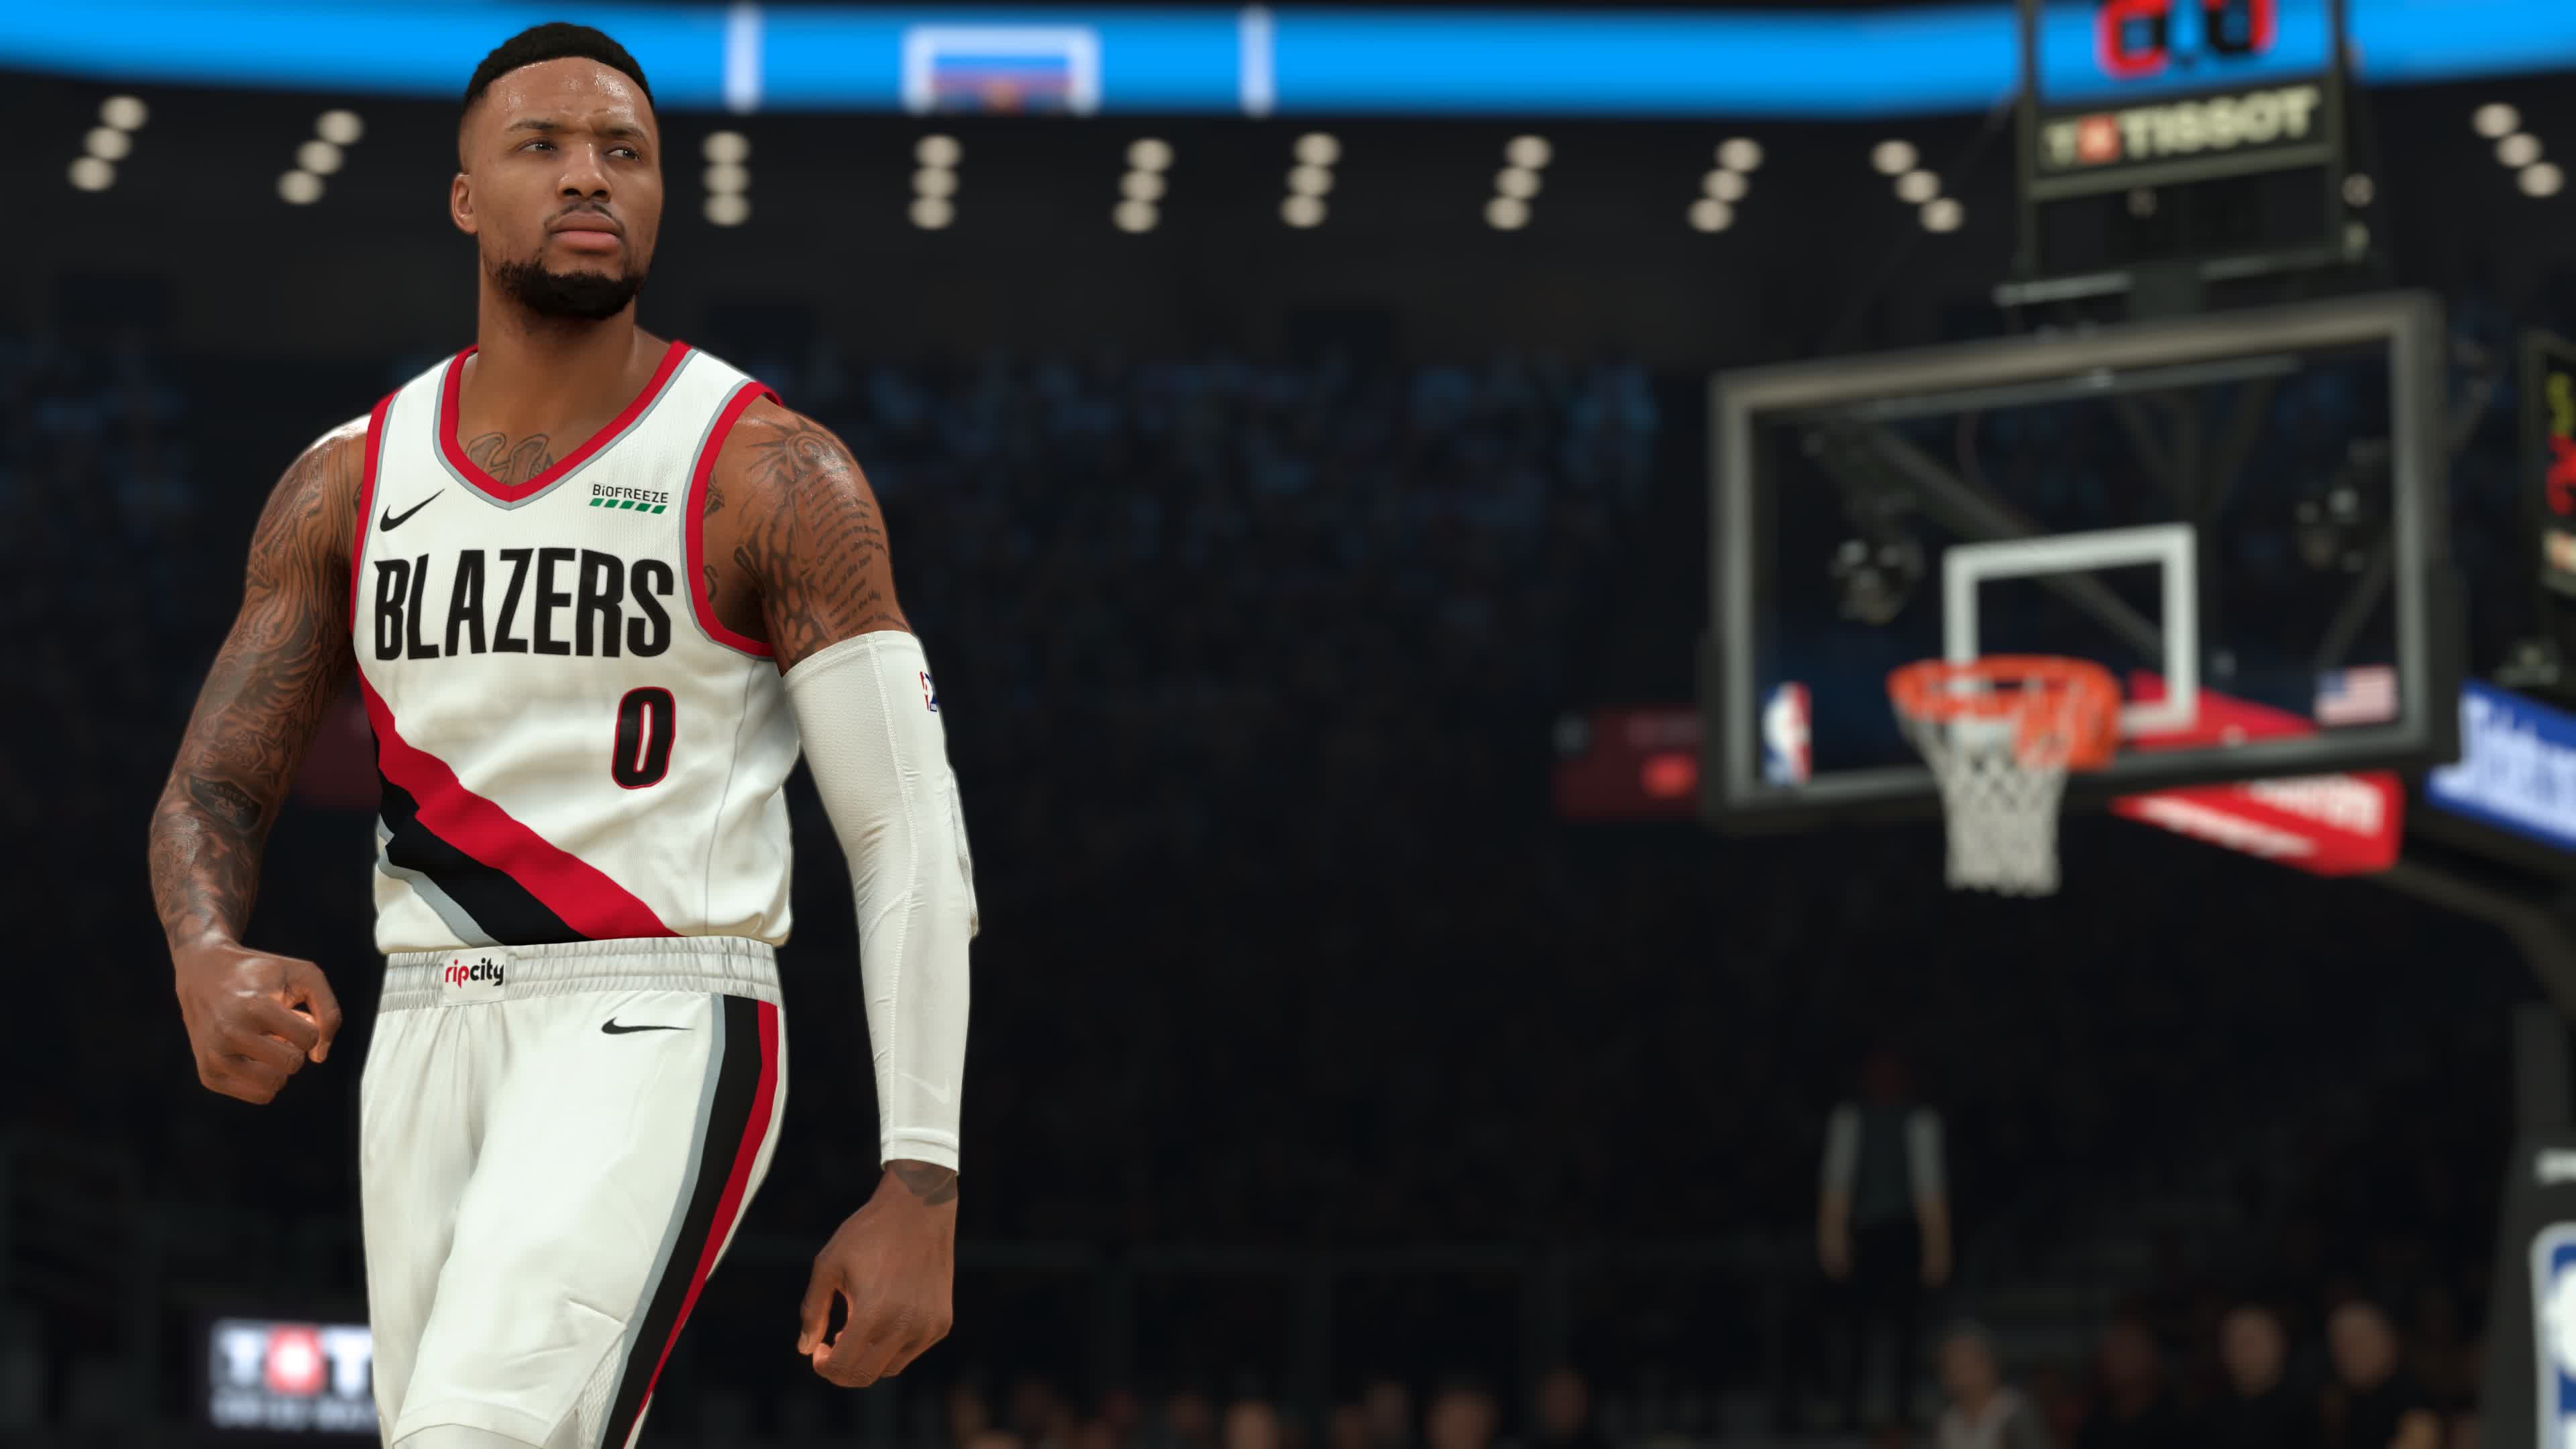 2K Sports adds unskippable ads in loading screens for NBA 2K21 (Updated)